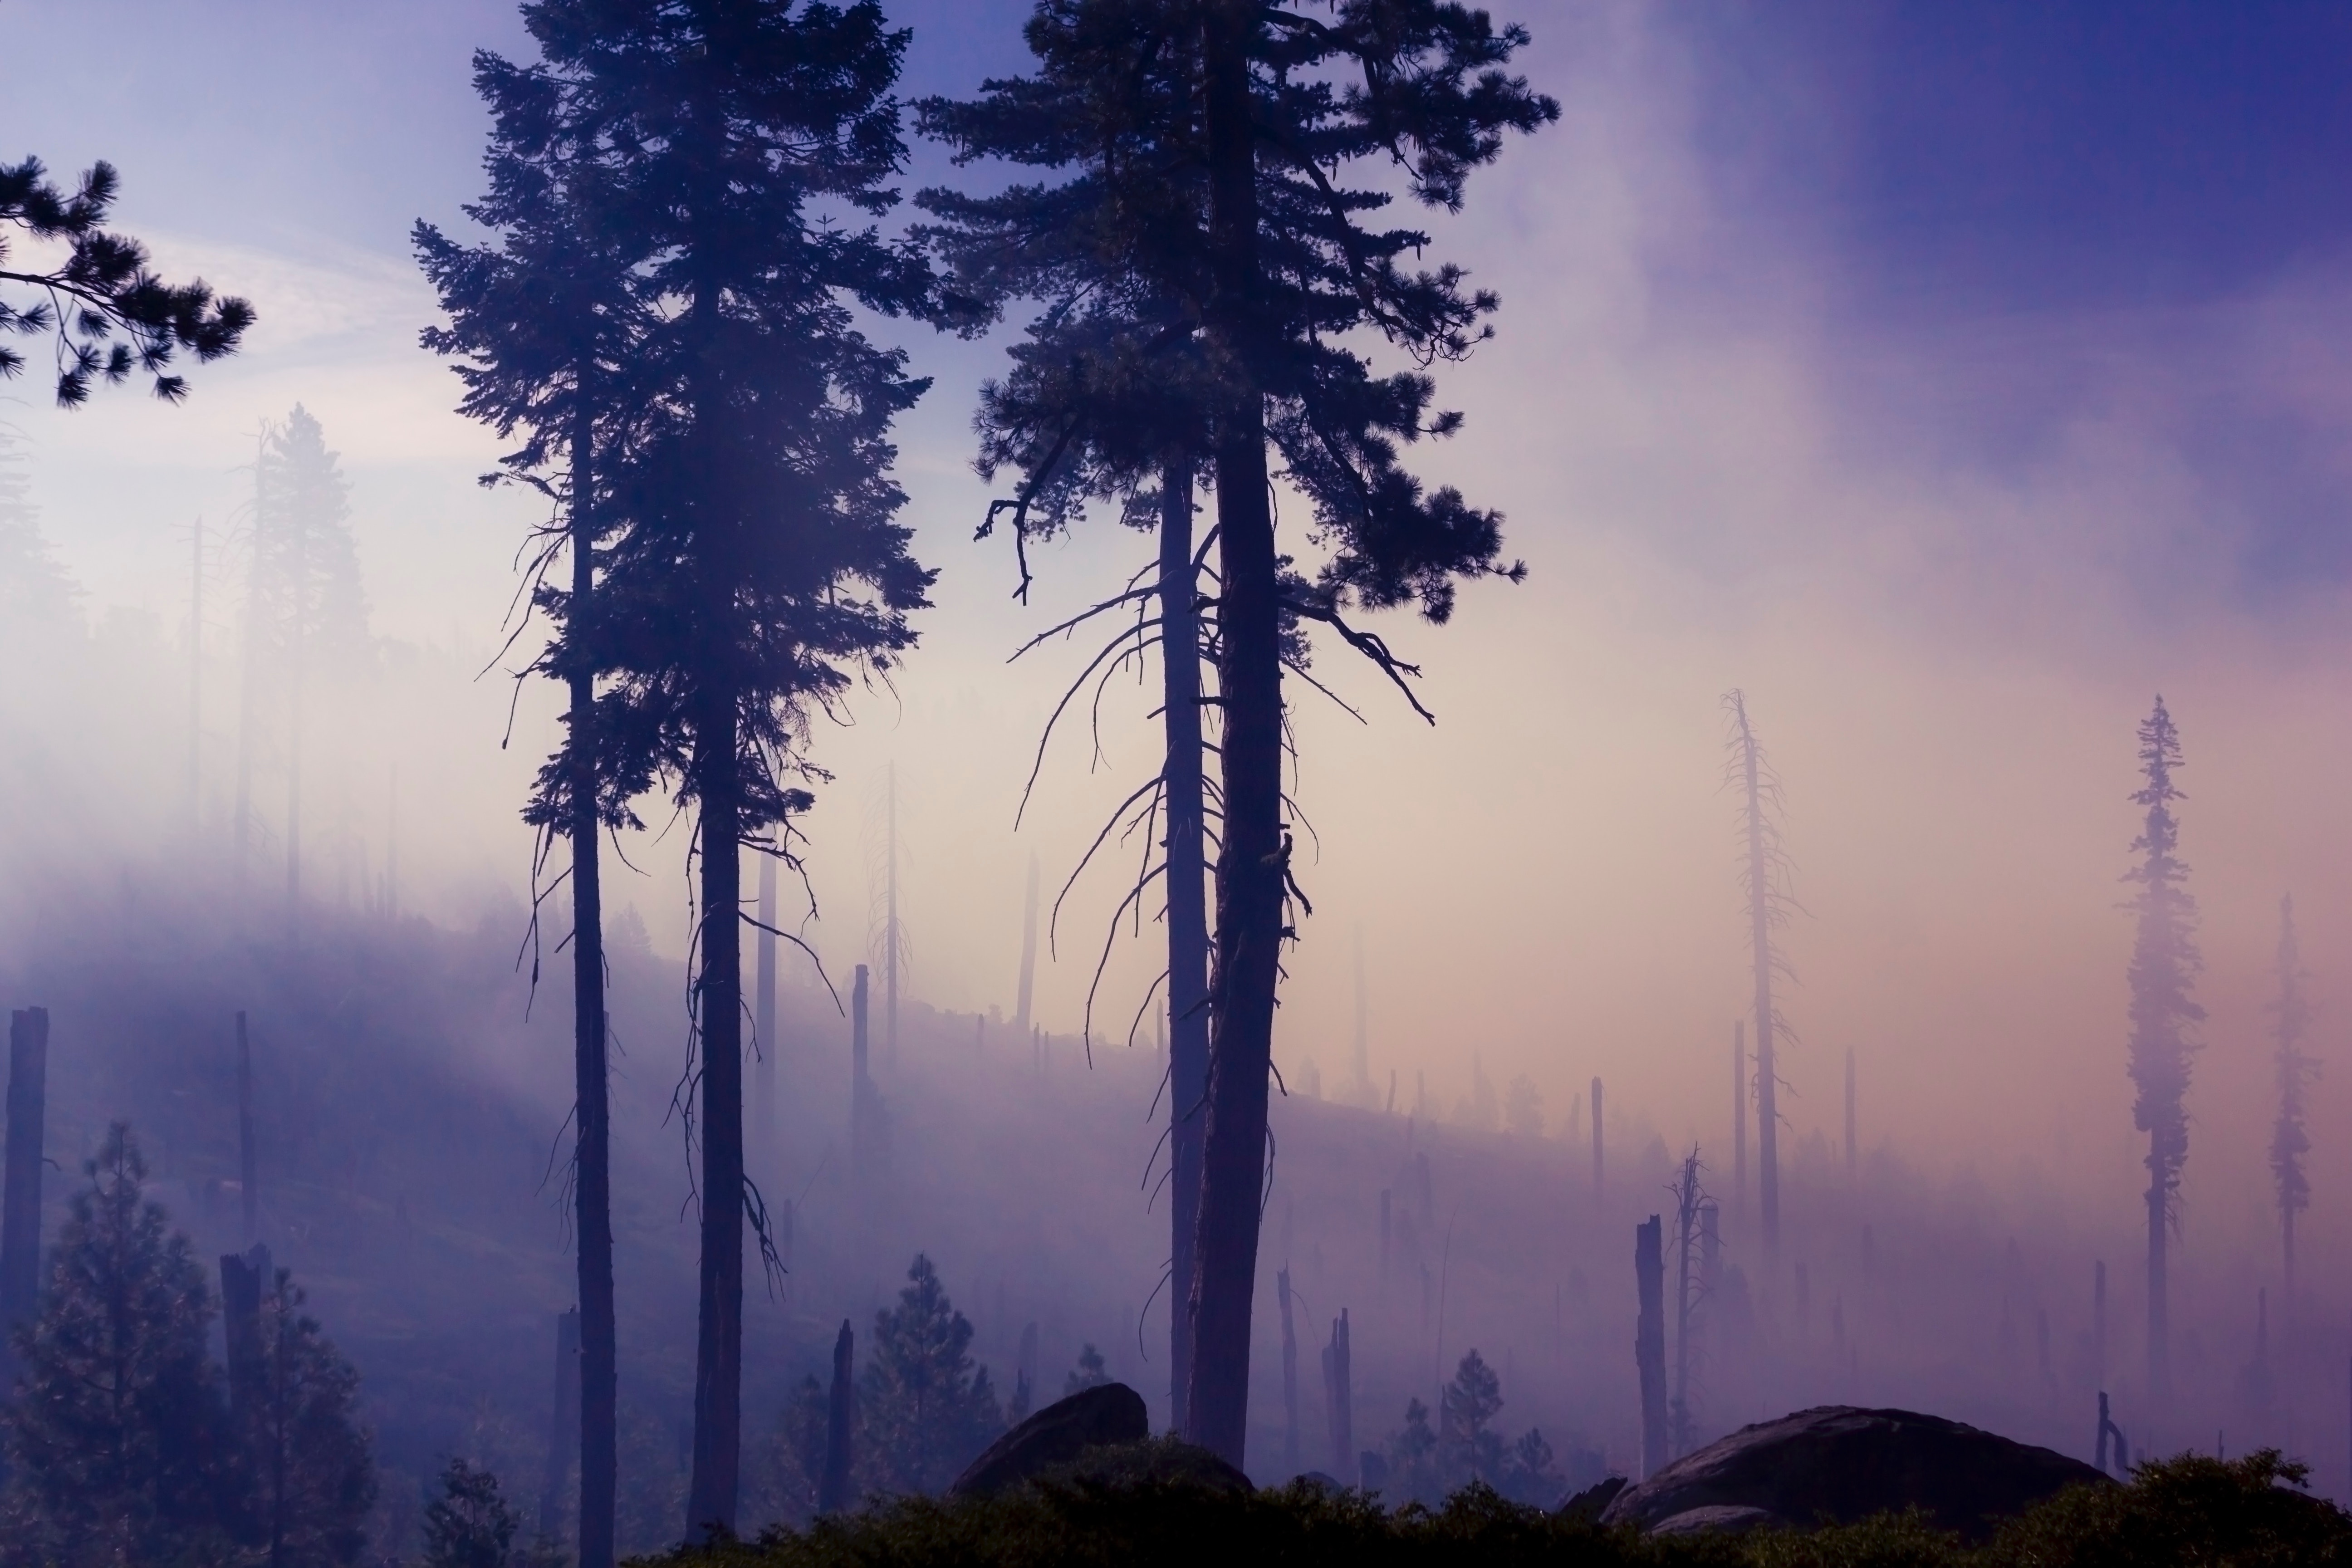 Dawn after wildfire in a forest